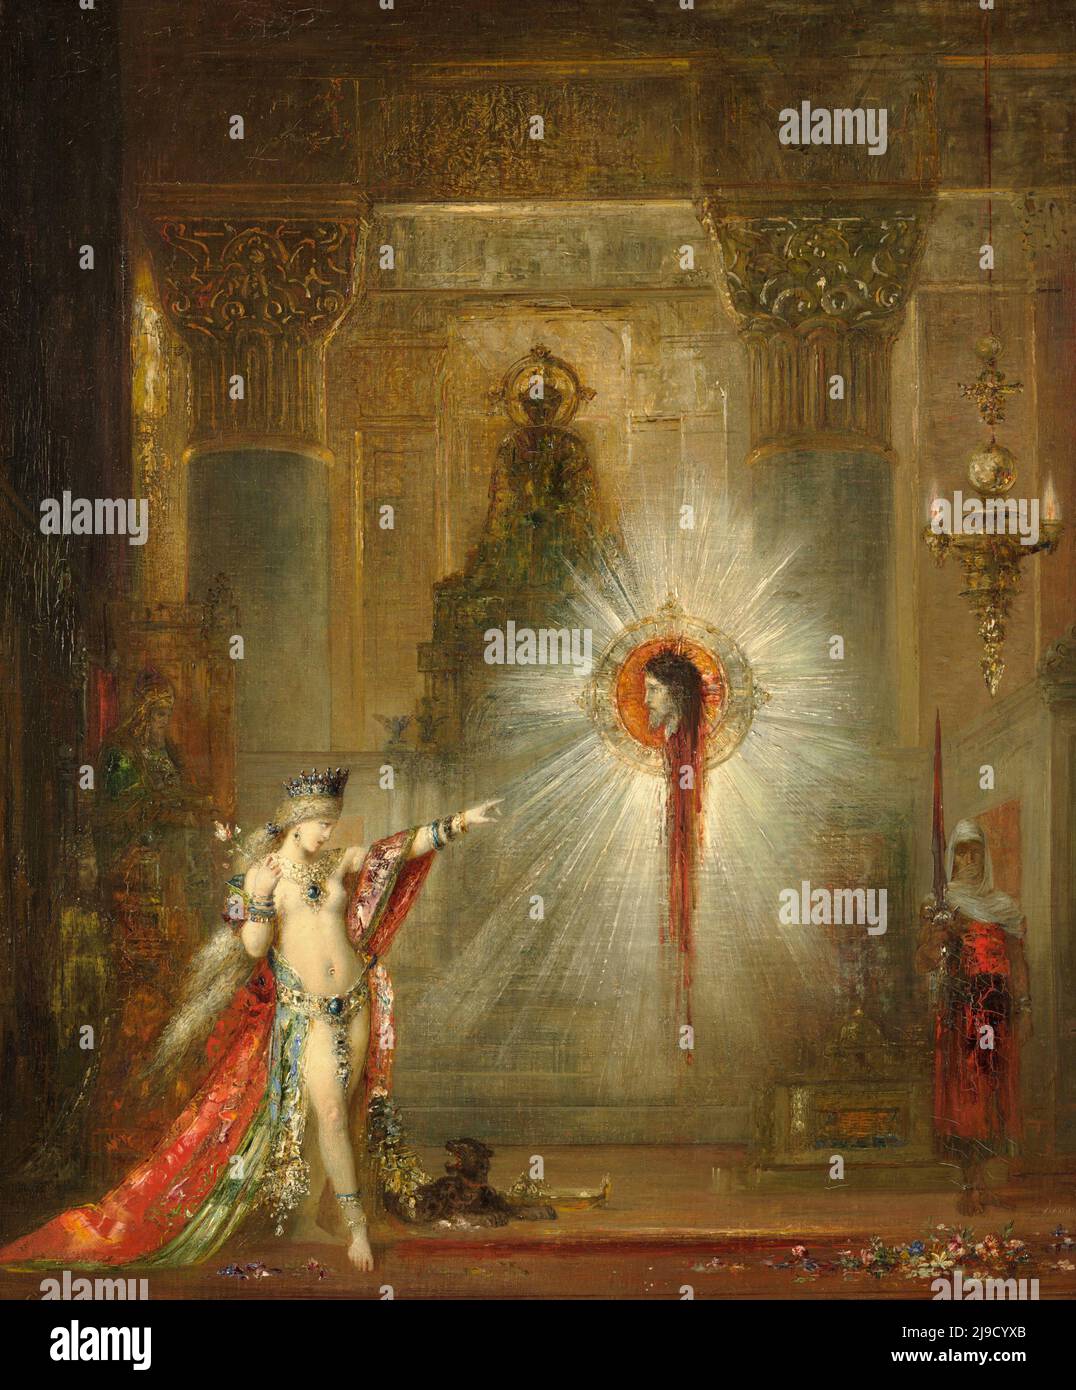 Salome and the Apparition of the Baptist's Head by Gustave Moreau. The scene shows Salome dancing seductively for Herod whilst the apparition of the recently executed John the Baptist appears in the air. Stock Photo